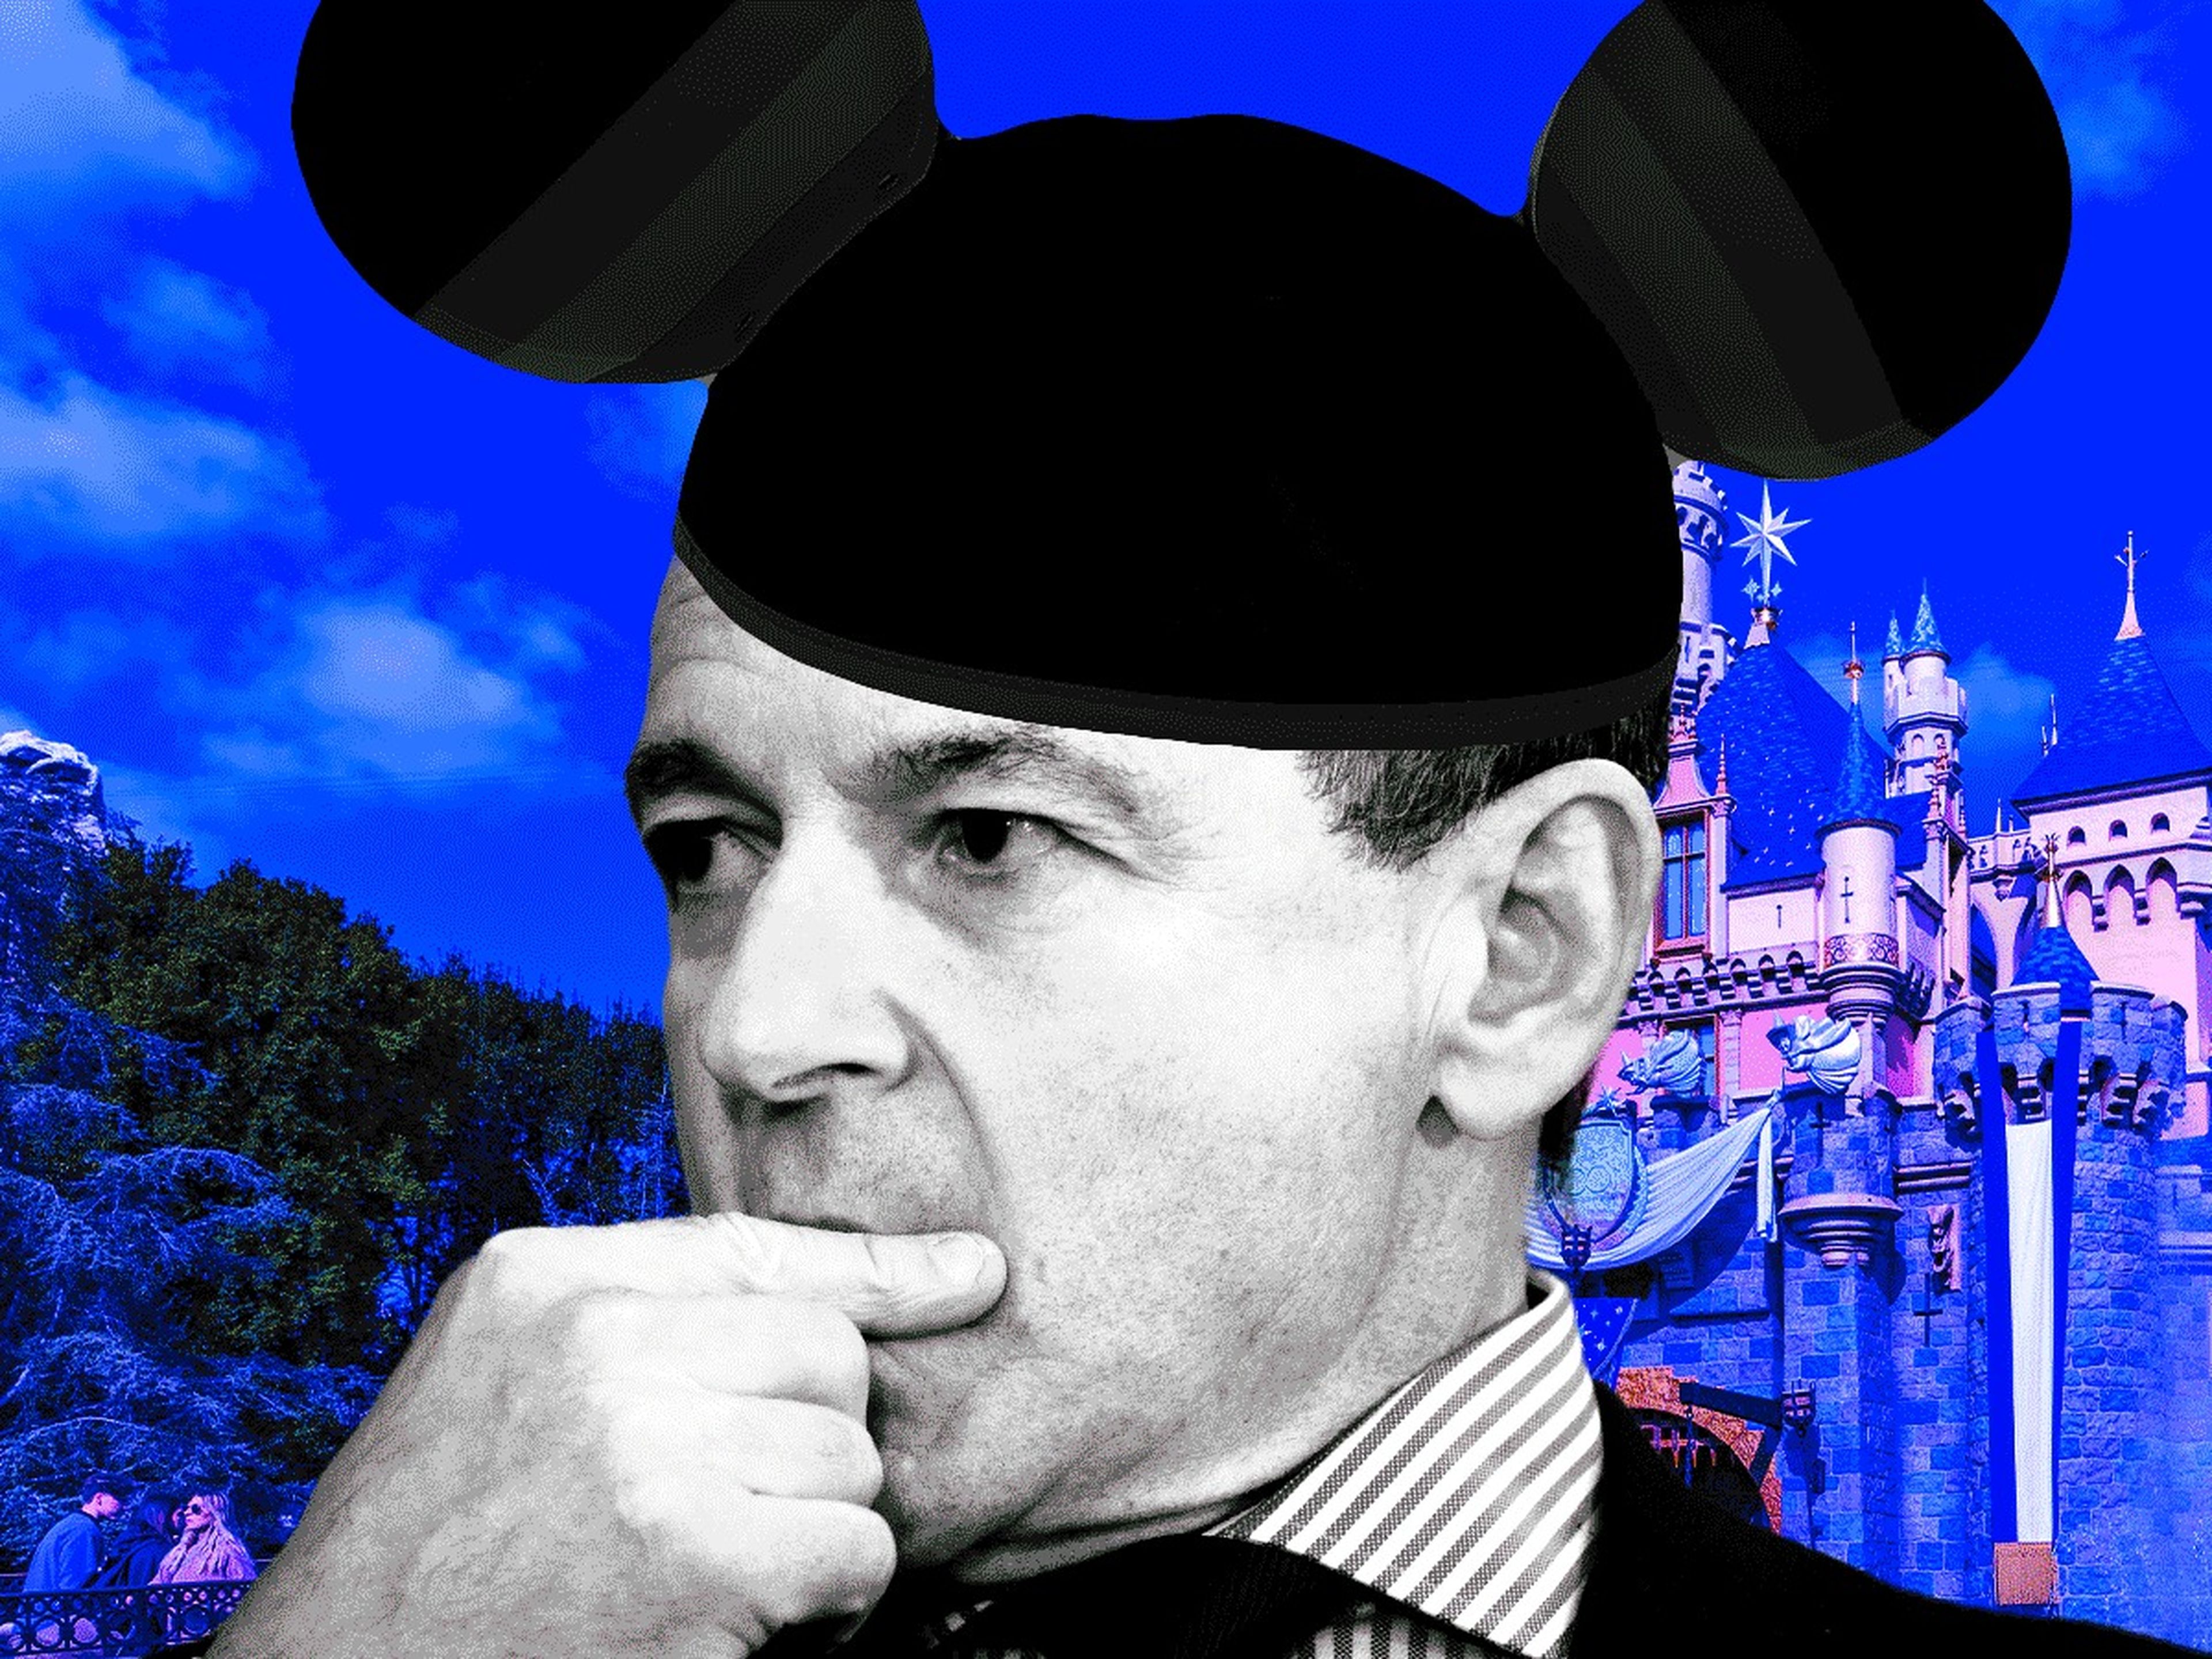 Bob Iger with his Mickey Mouse "thinking cap" on, with Disney castle in the background.